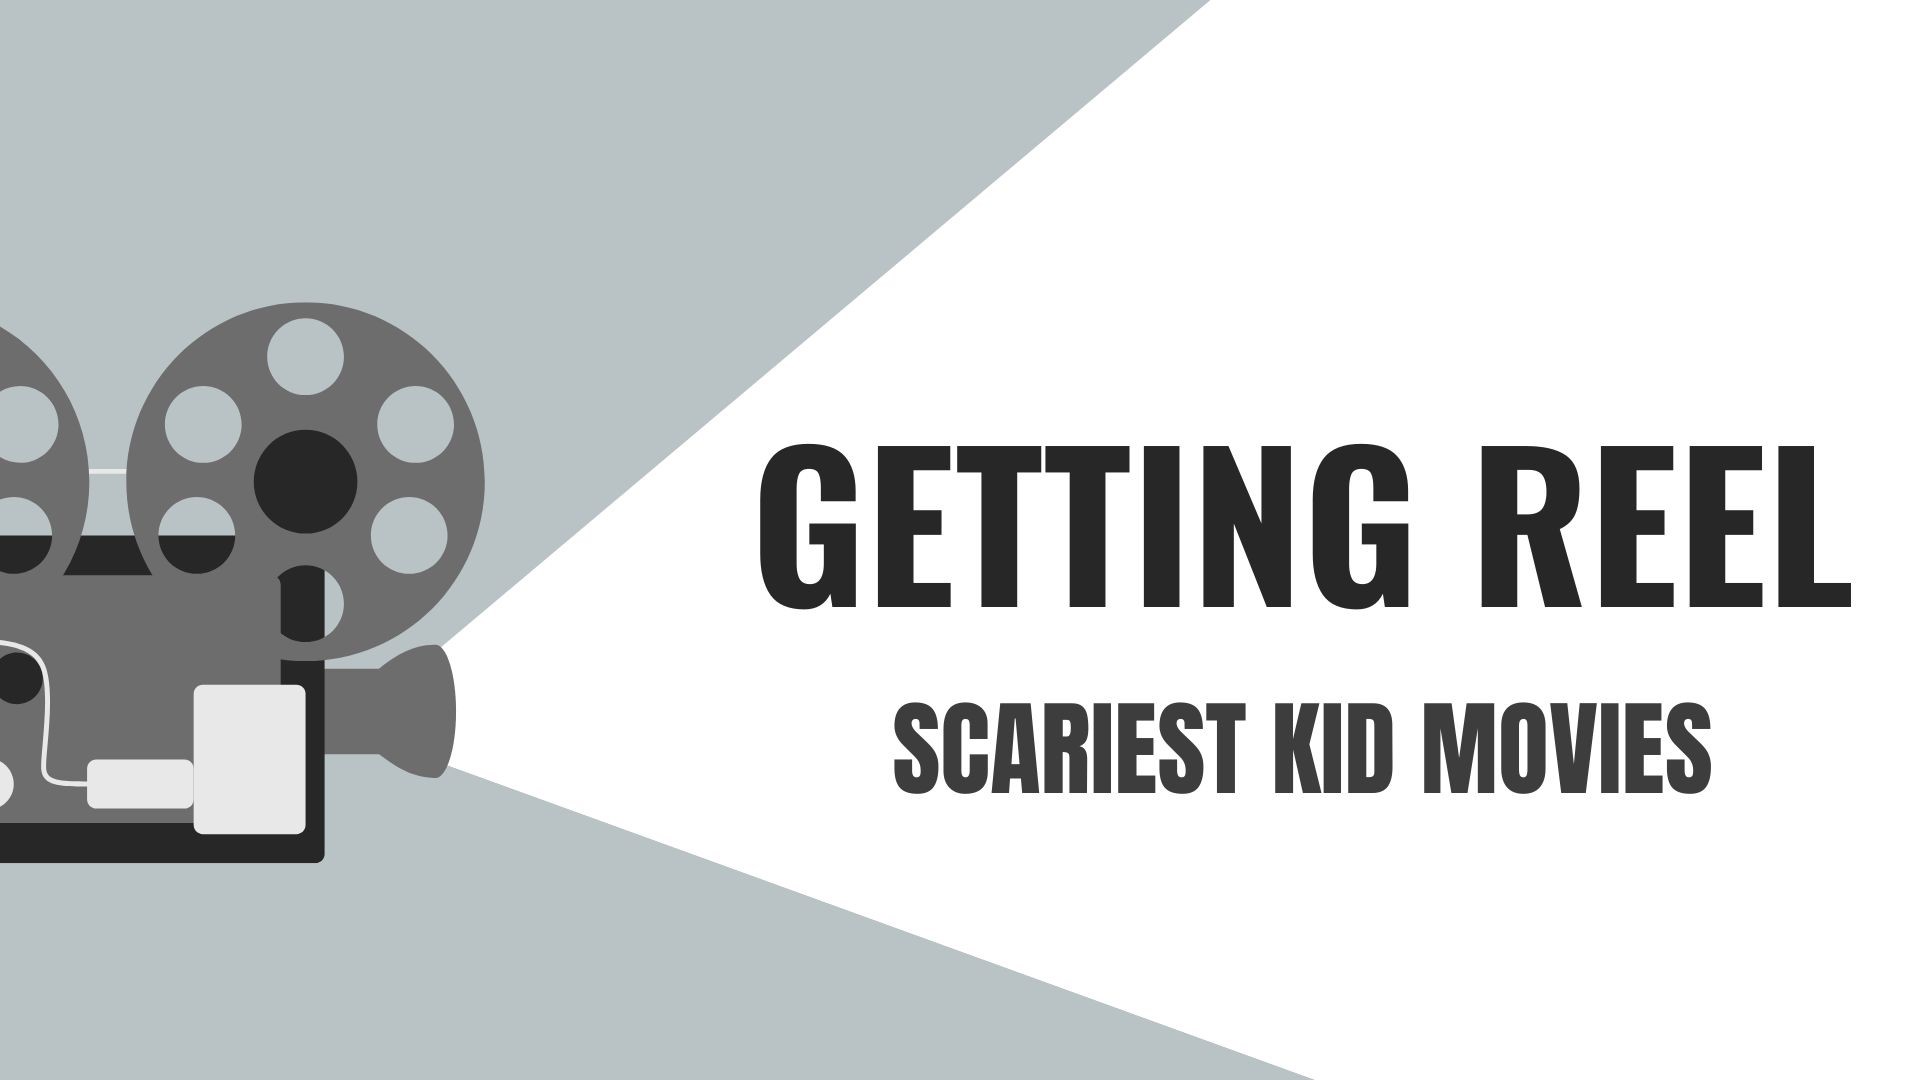 KTHV movie reviewer Michael Buckner explains which movies he thinks are the scariest for kids. Plus some of the honorable mentions he still plans to watch.